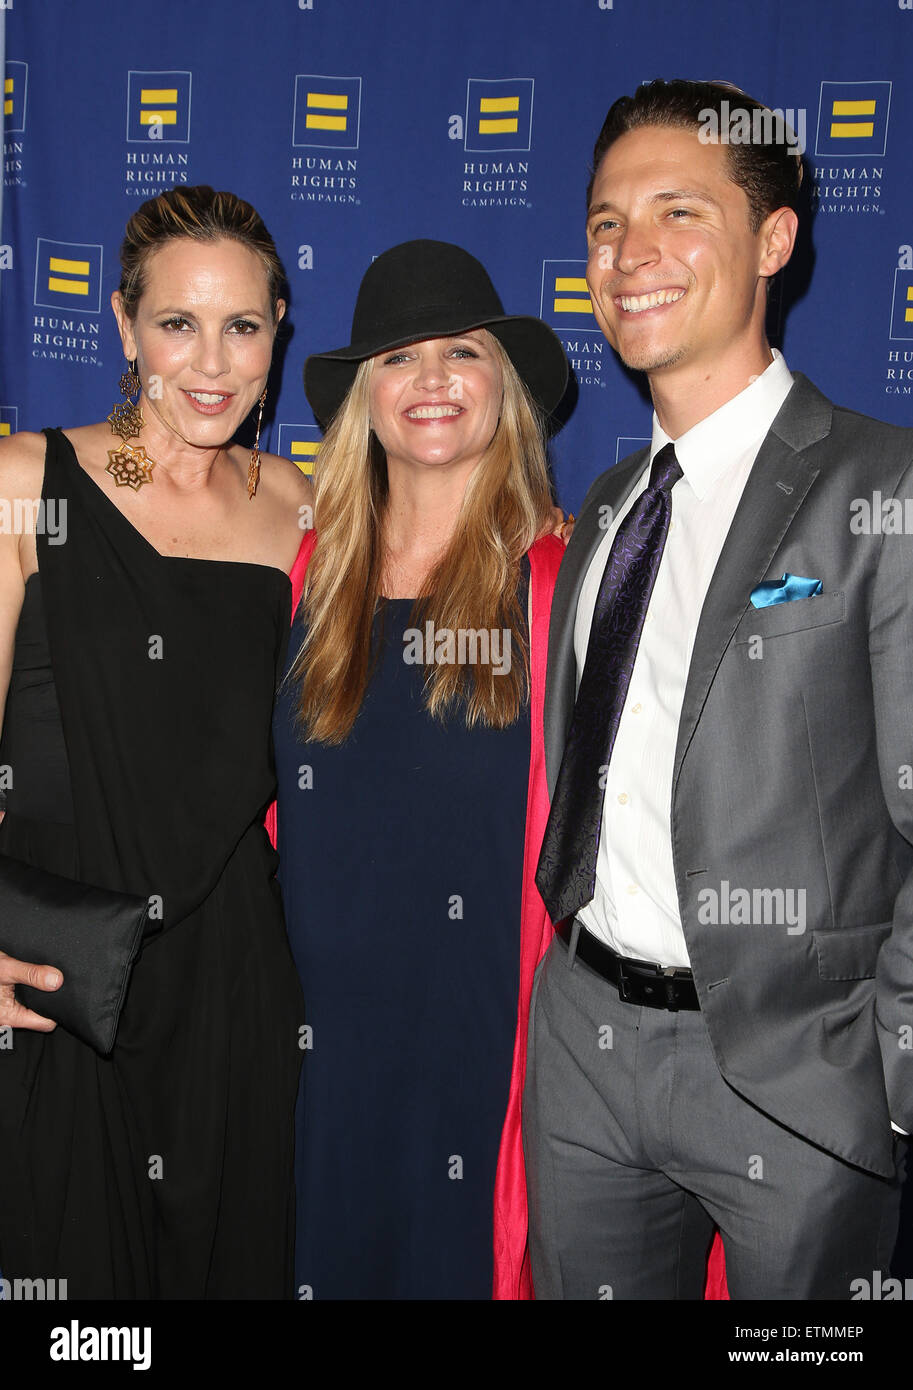 HRC Los Angeles Gala Dinner 2015 at the JW Marriott Hotel at LA Live - Arrivals  Featuring: Maria Bello, Clare Munn, Elijah Allan-Blitz Where: Los Angeles, California, United States When: 14 Mar 2015 Credit: FayesVision/WENN.com Stock Photo